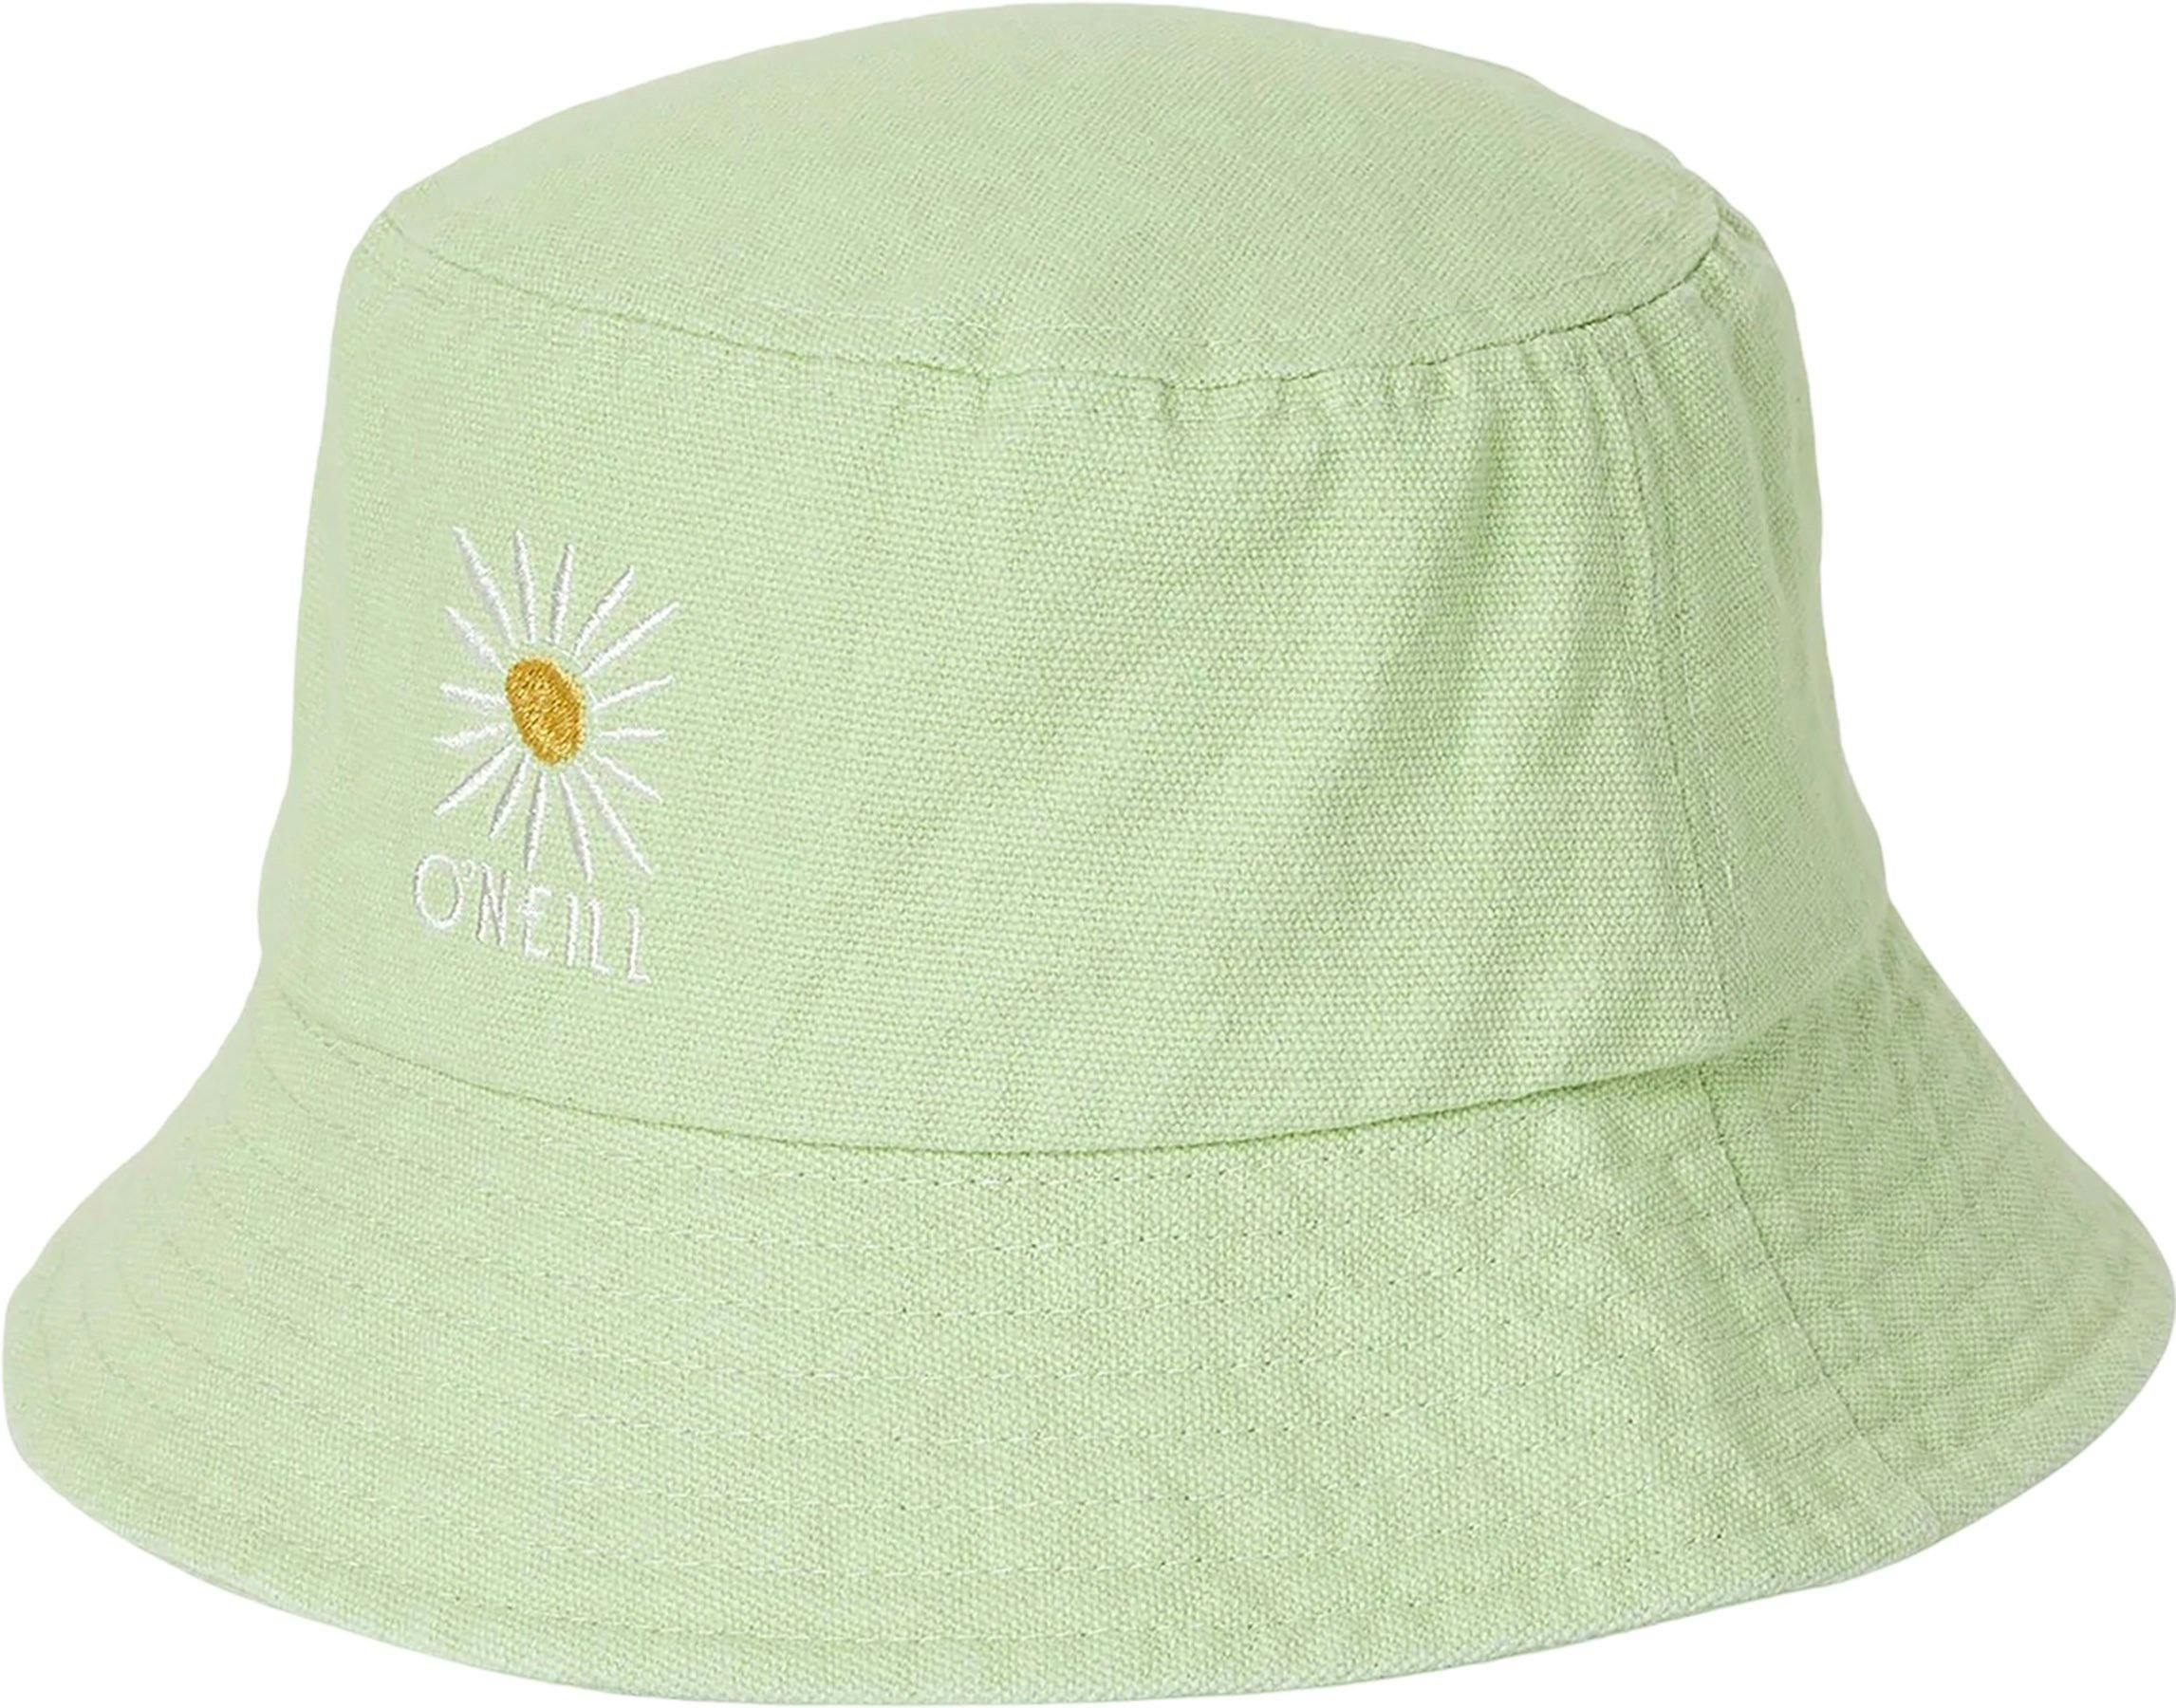 Product image for Piper Bucket Hat - Women's